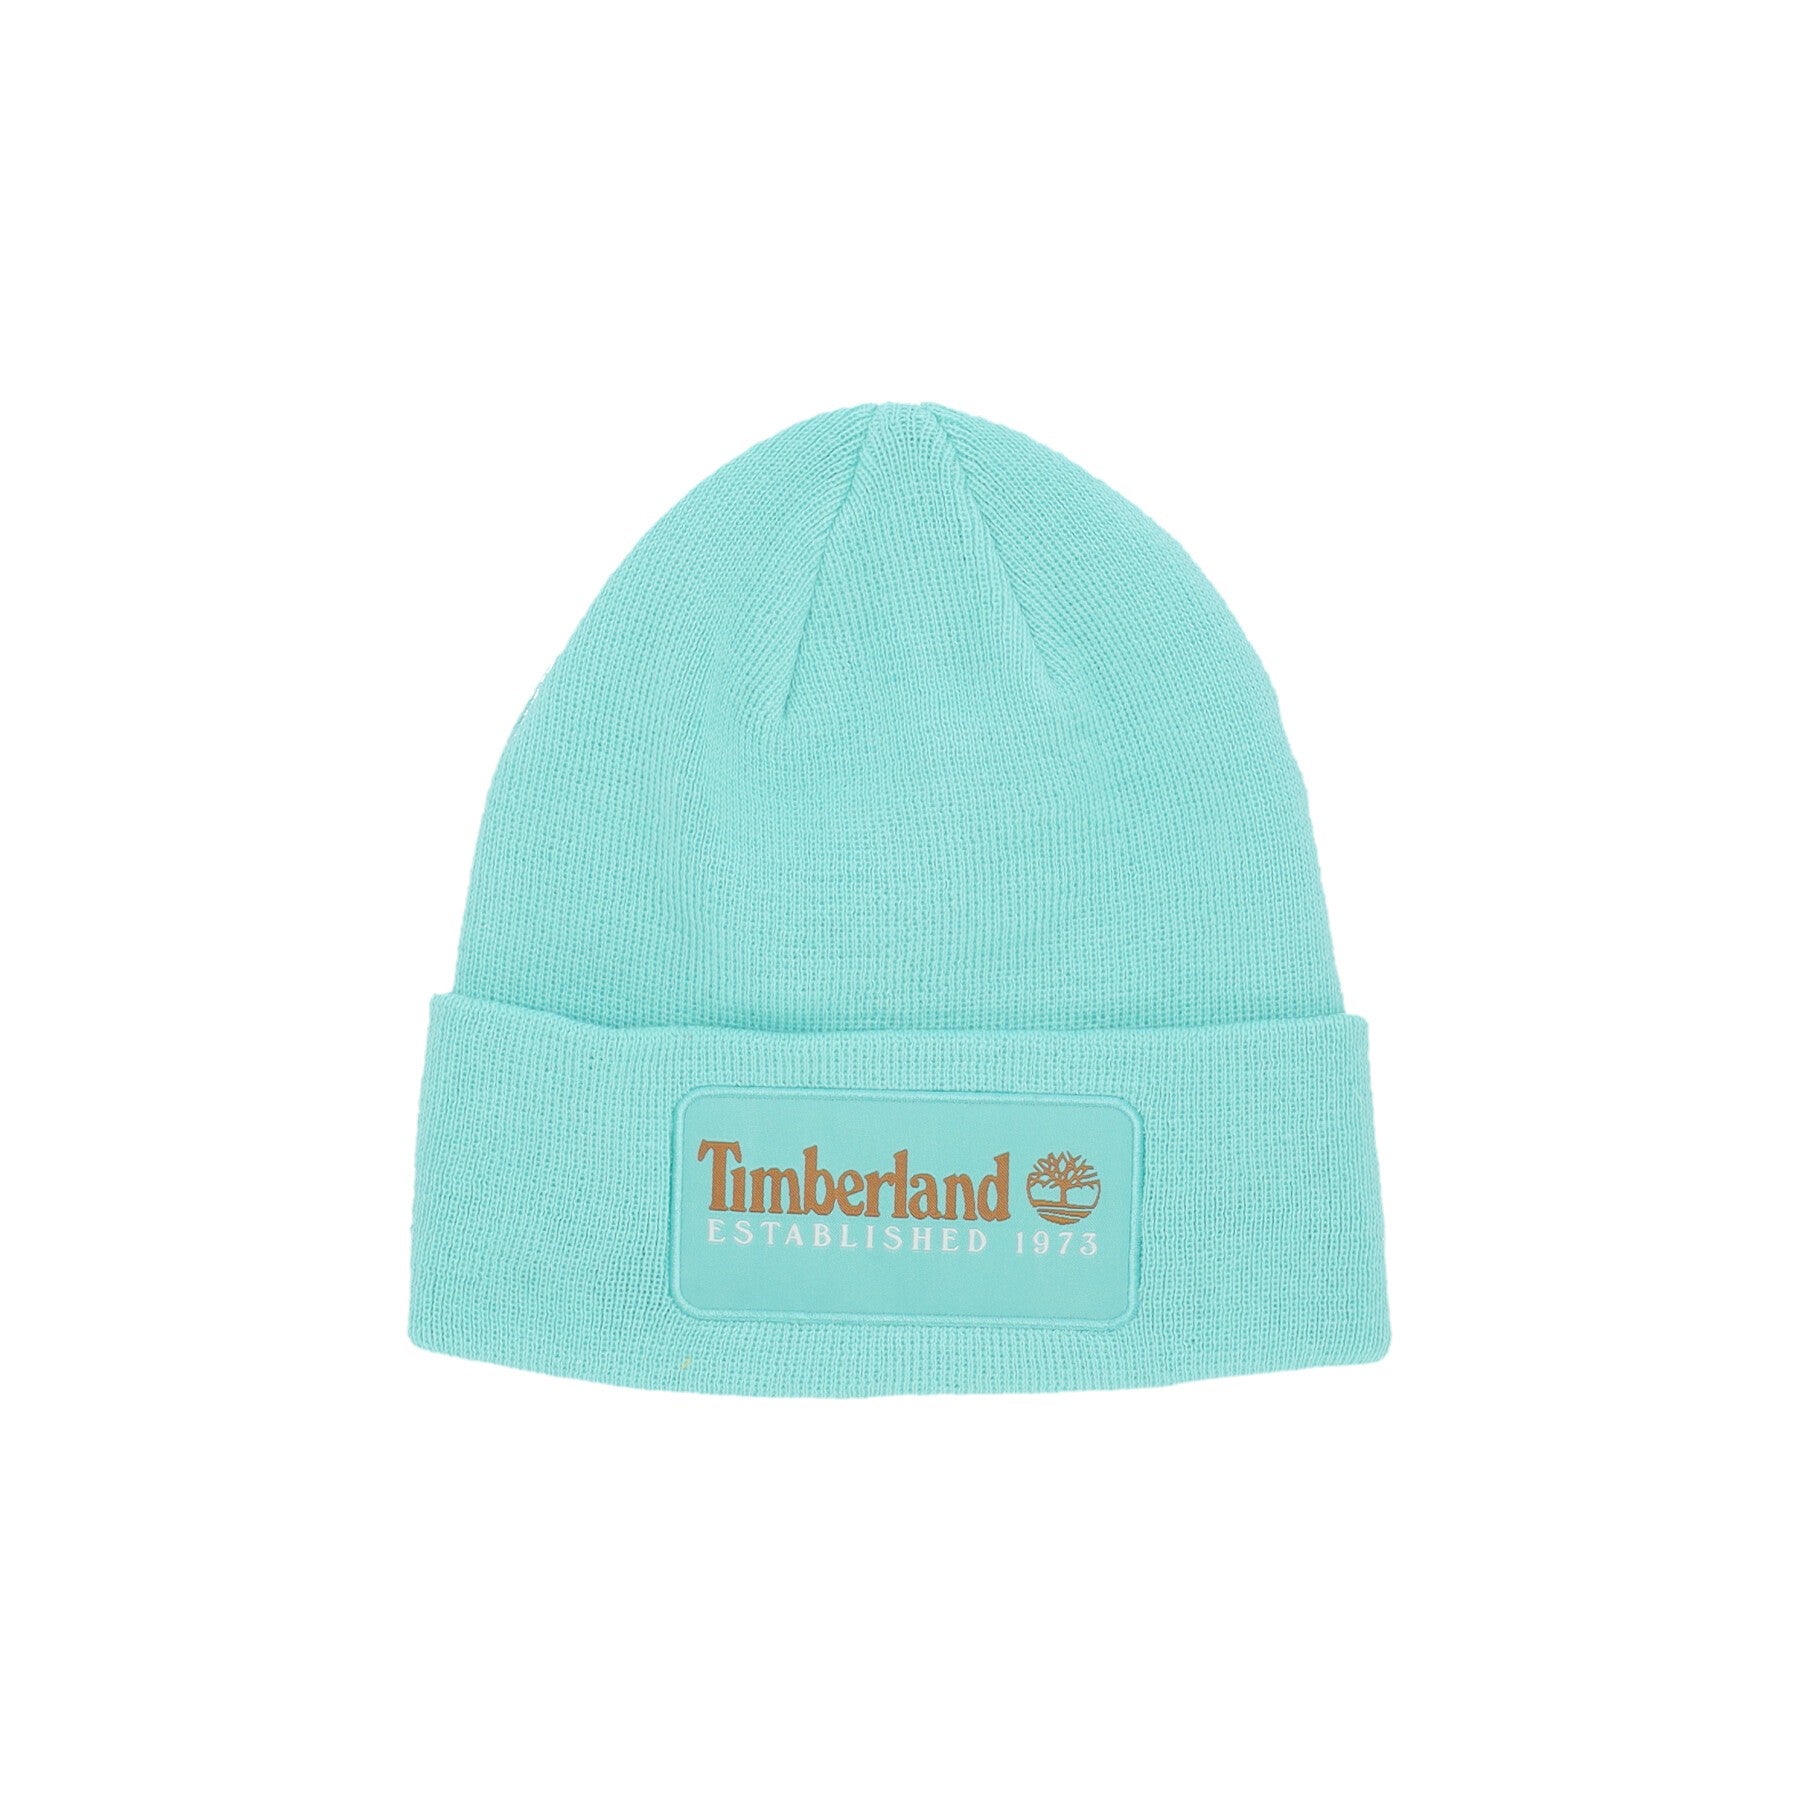 Timberland, Cappello Uomo Established 1973 Beanie, Holiday Teal